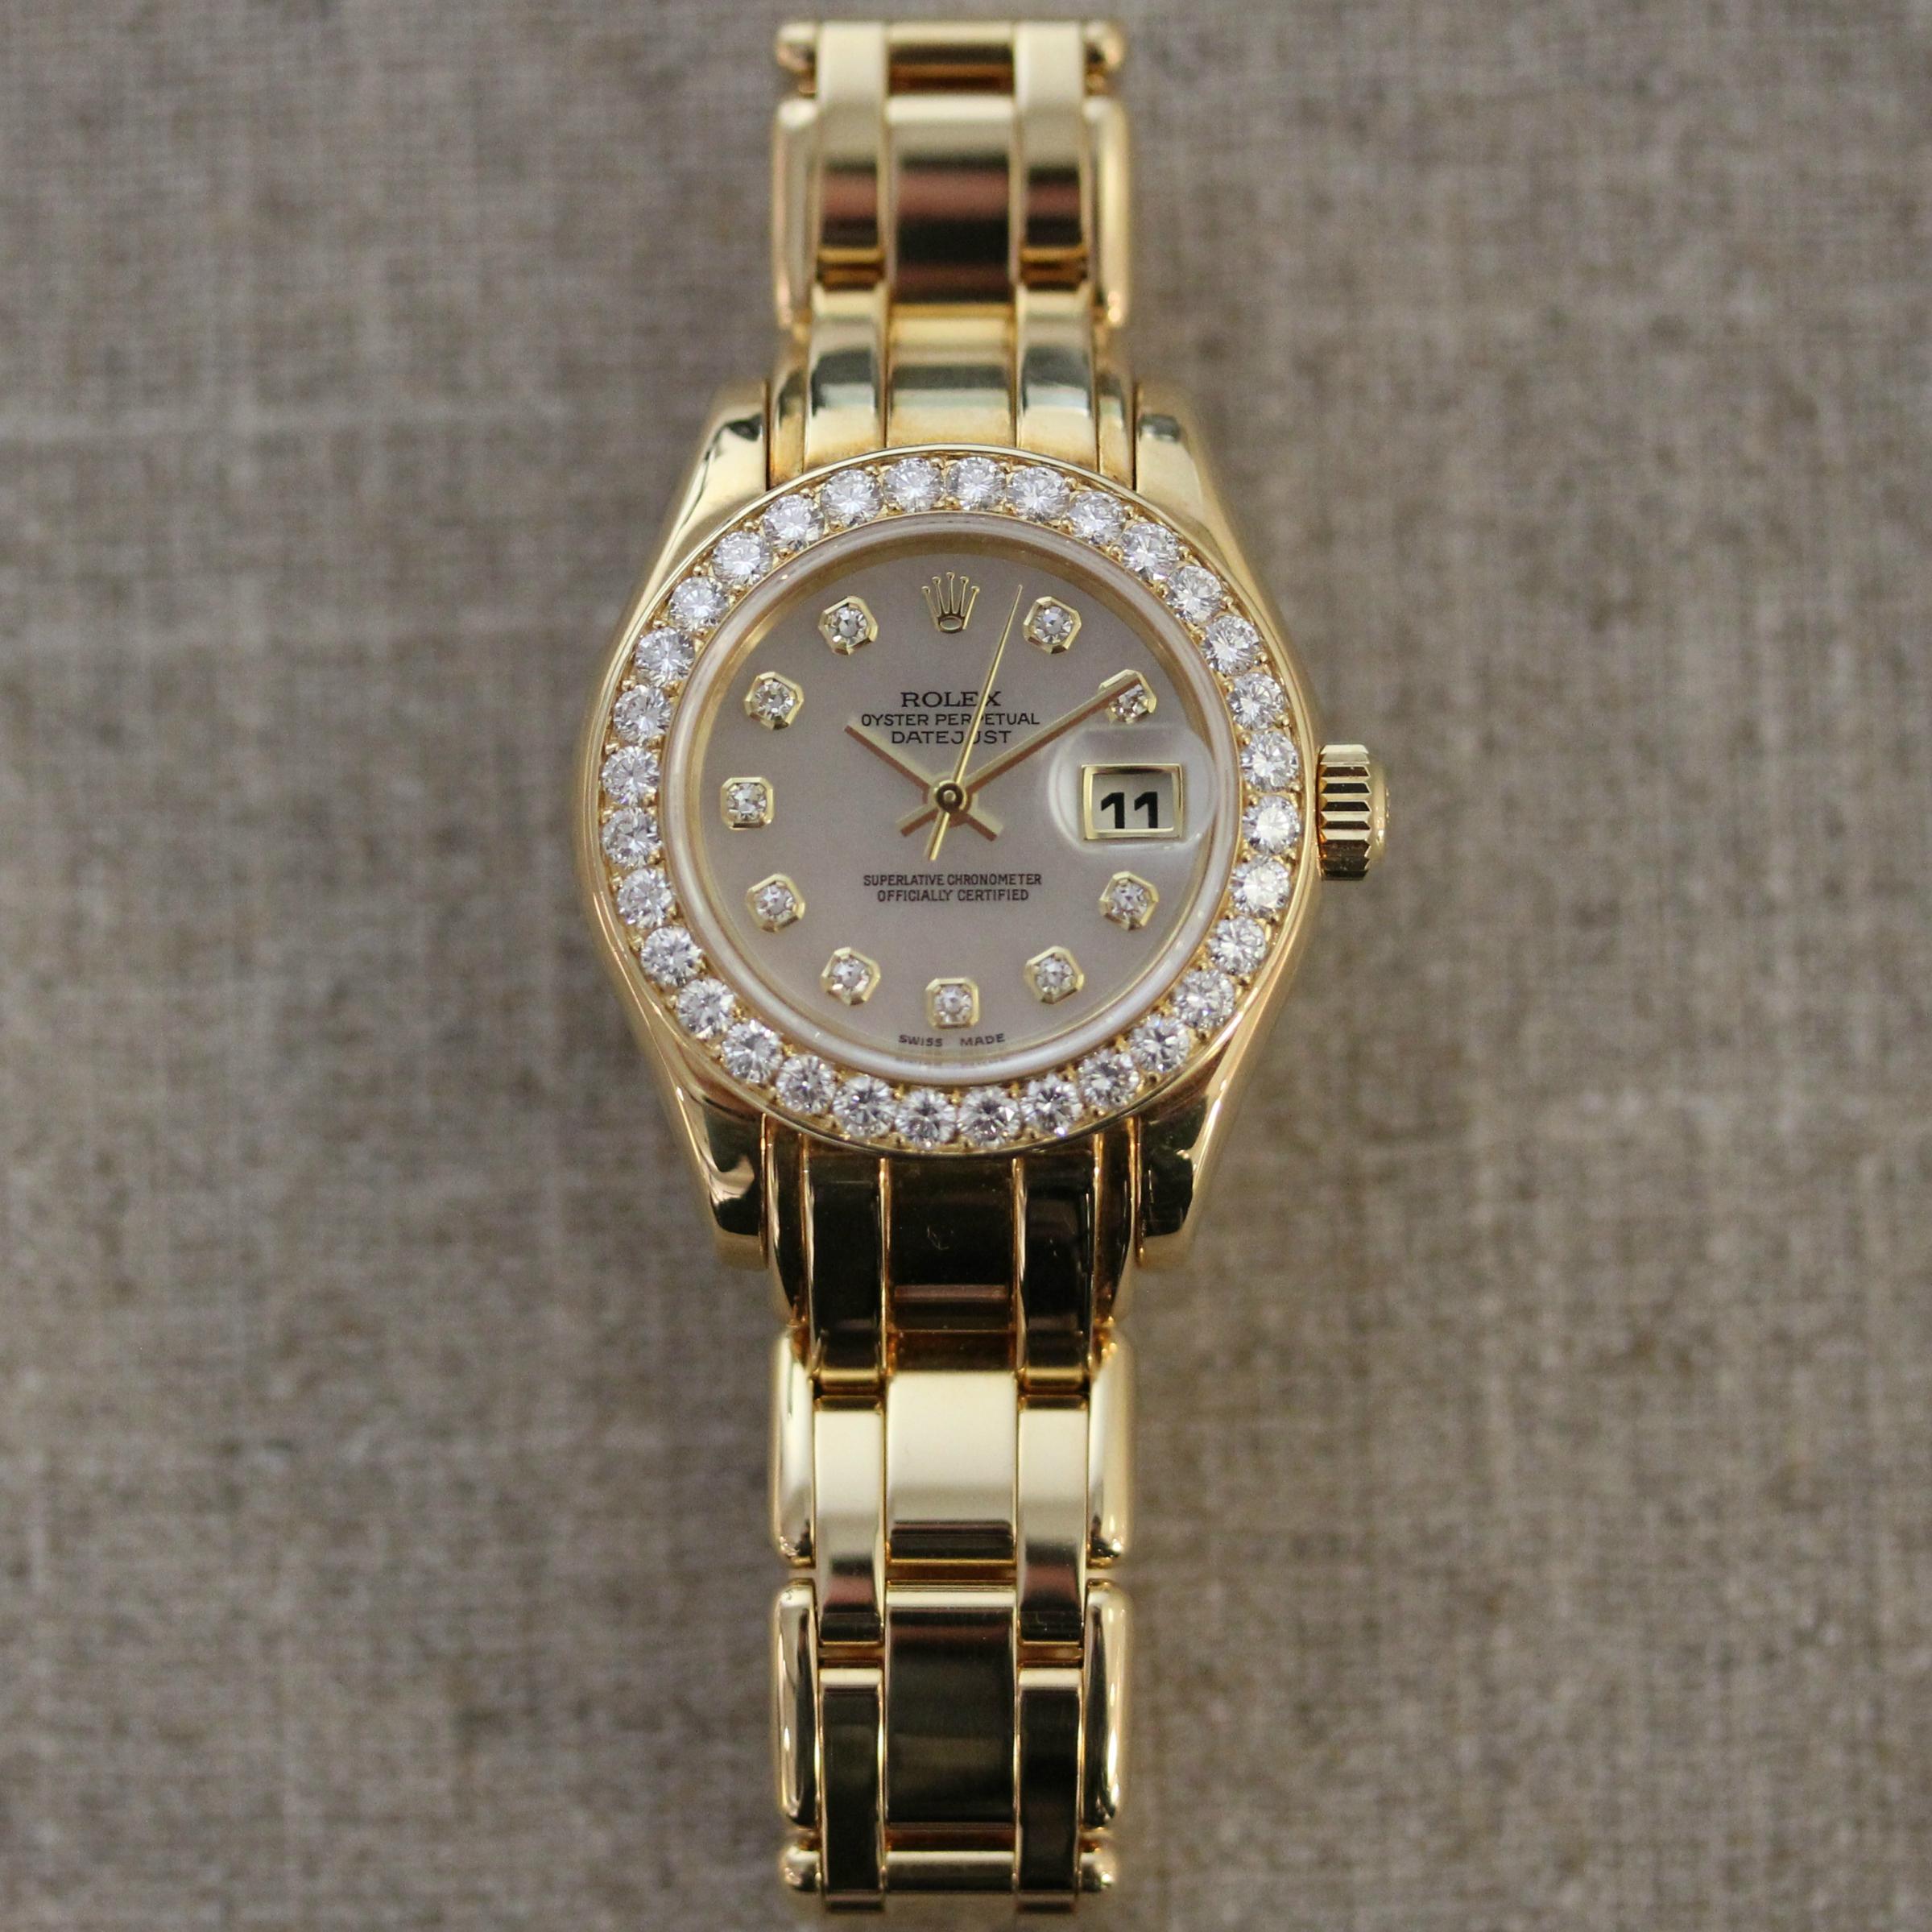 Vintage 18k yellow gold Rolex Pearlmaster Mother of Pearl diamond dial with
diamond bezel. The watch has a date at 3 position with a cyclops lens.
Model#69298 Circa 1995 No box or papers, recently serviced  by Hamilton Jewelers. Warranty provided 